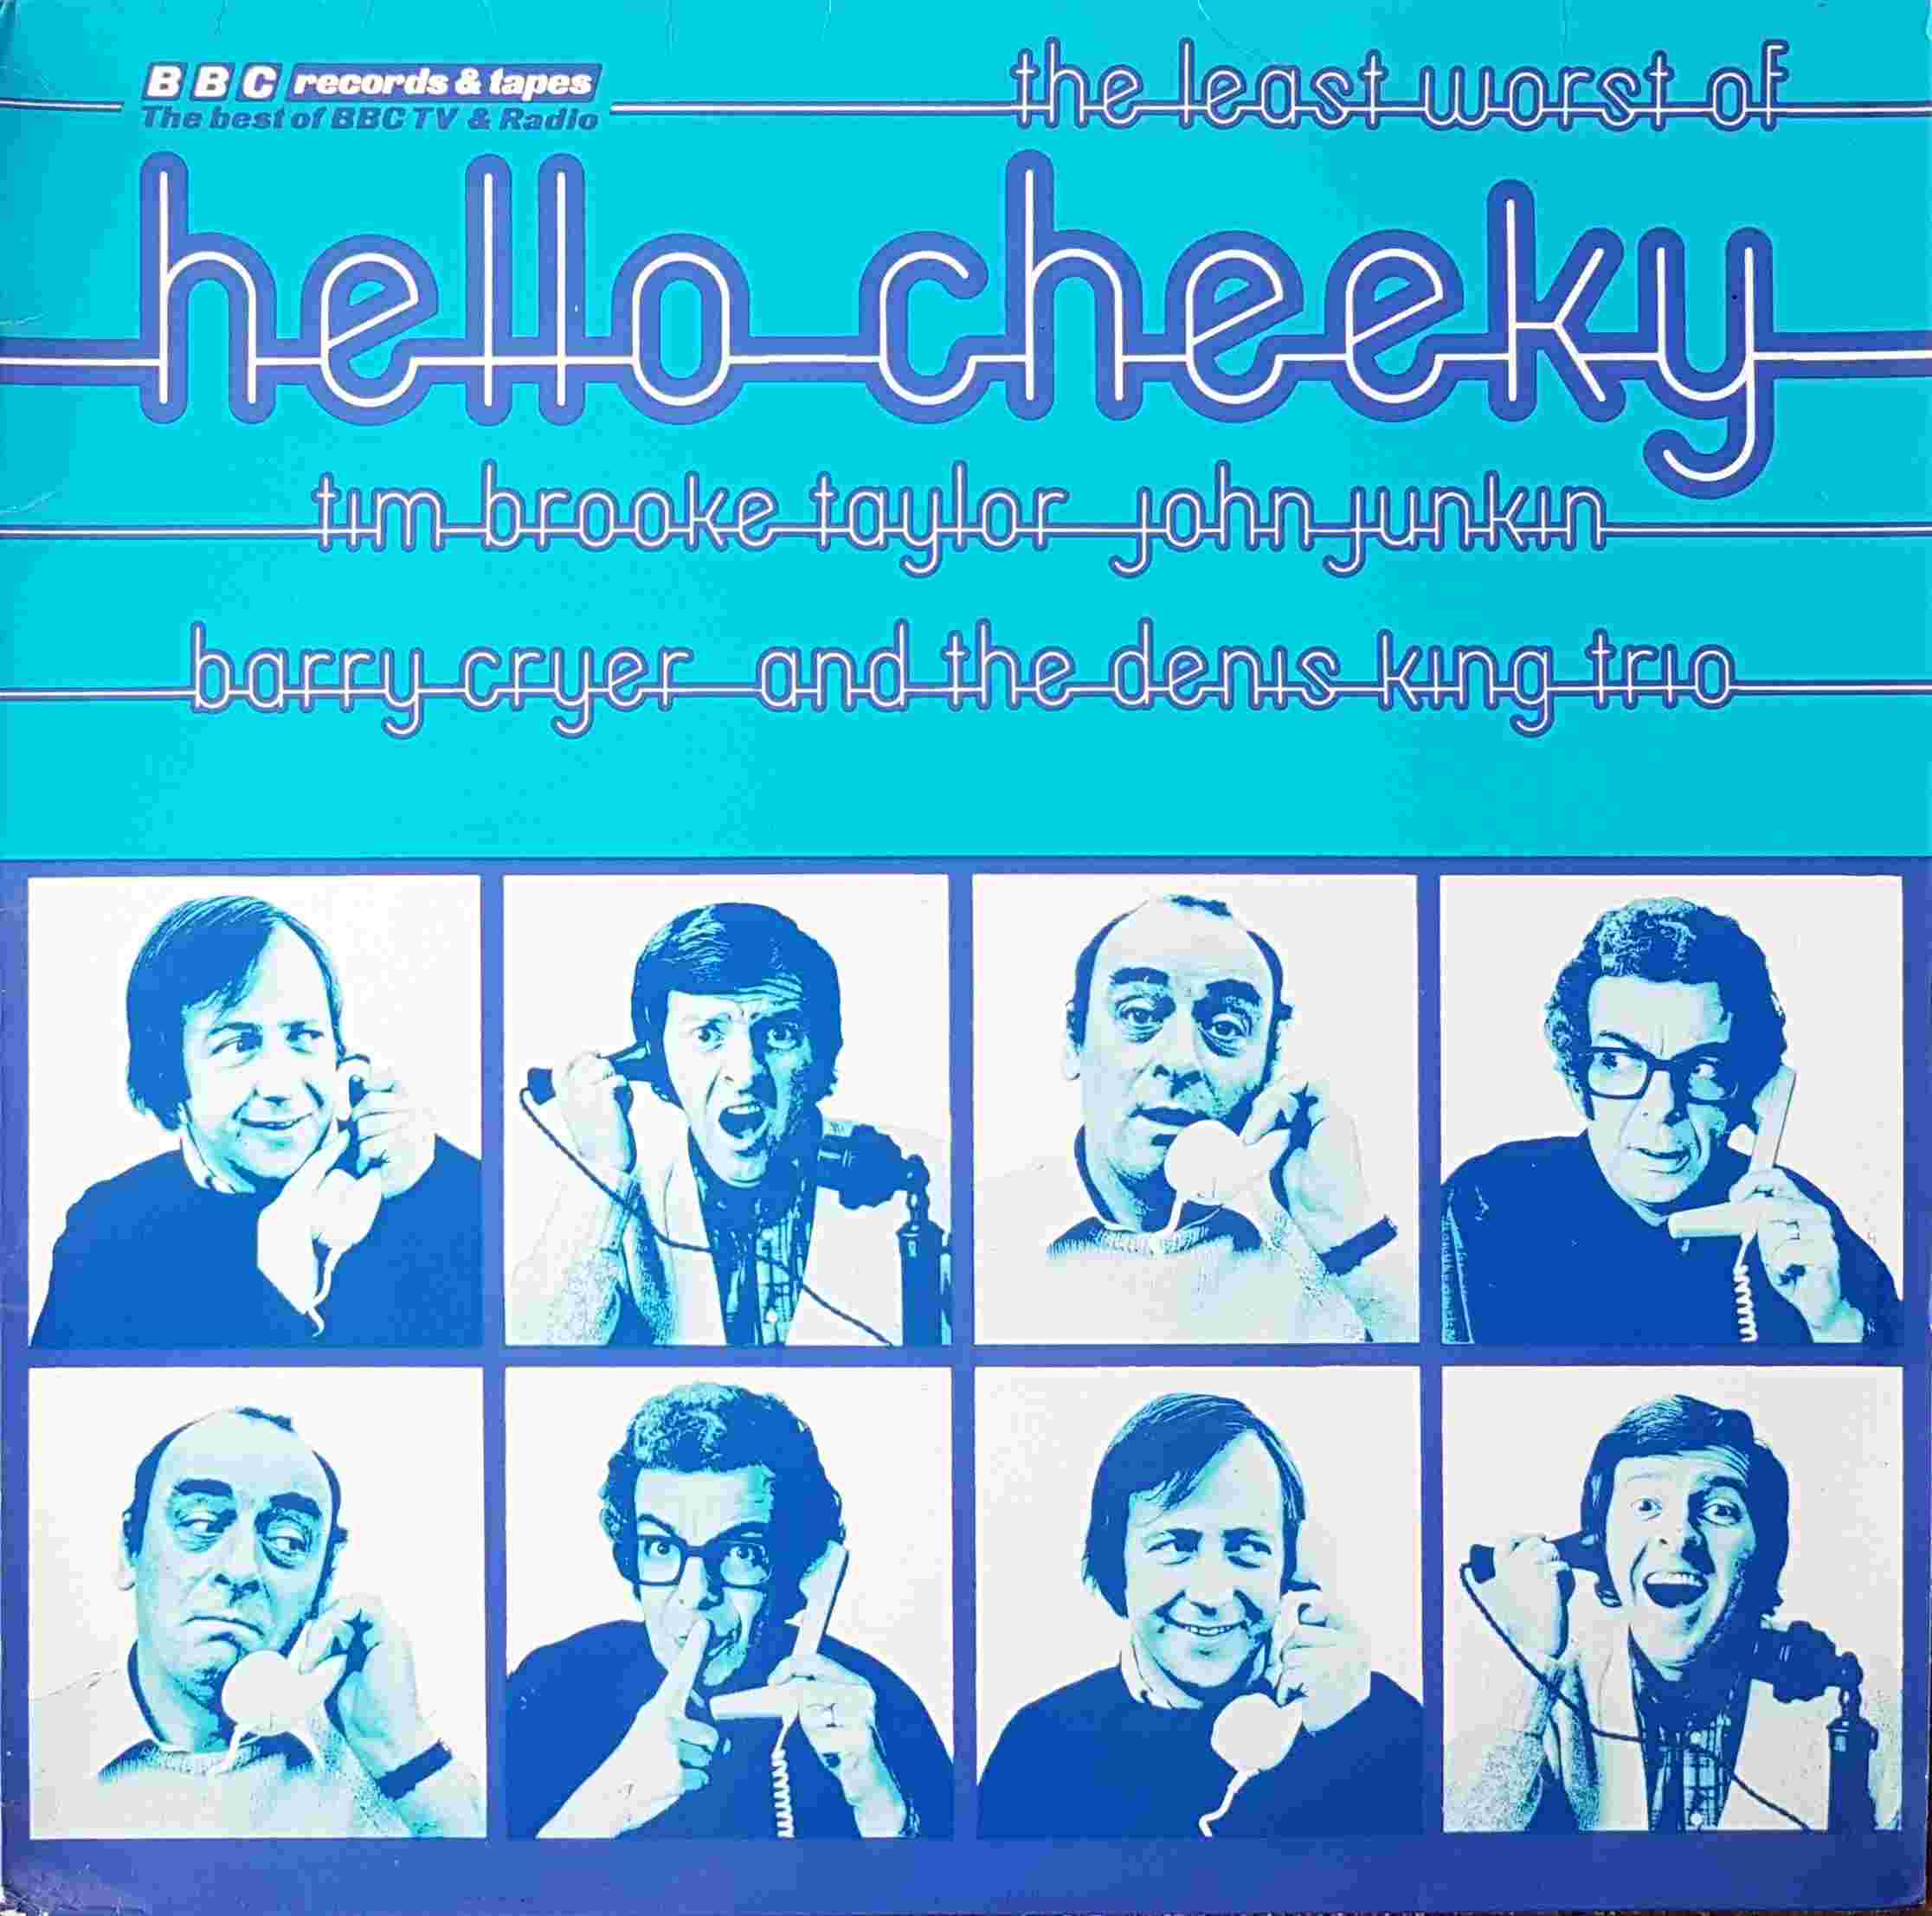 Picture of REH 189 Hello cheeky by artist Various from the BBC albums - Records and Tapes library